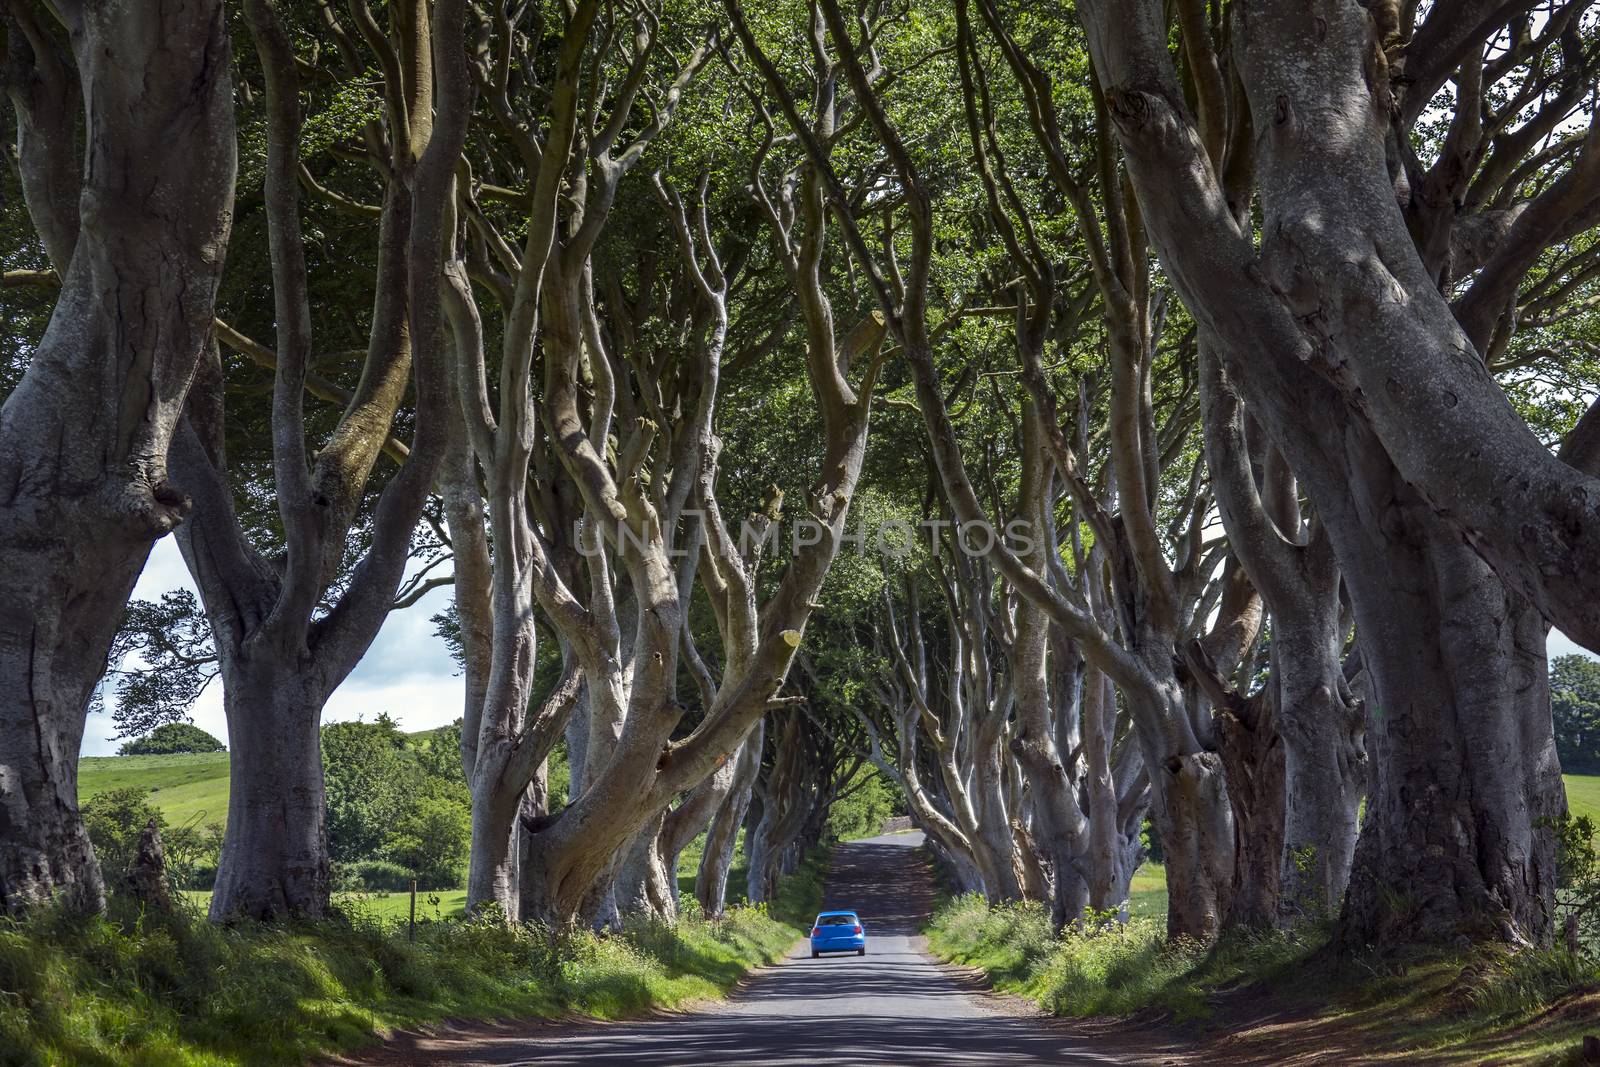 The 'Dark Hedges' - an avenue of ancient trees in County Antrim in Northern Ireland.